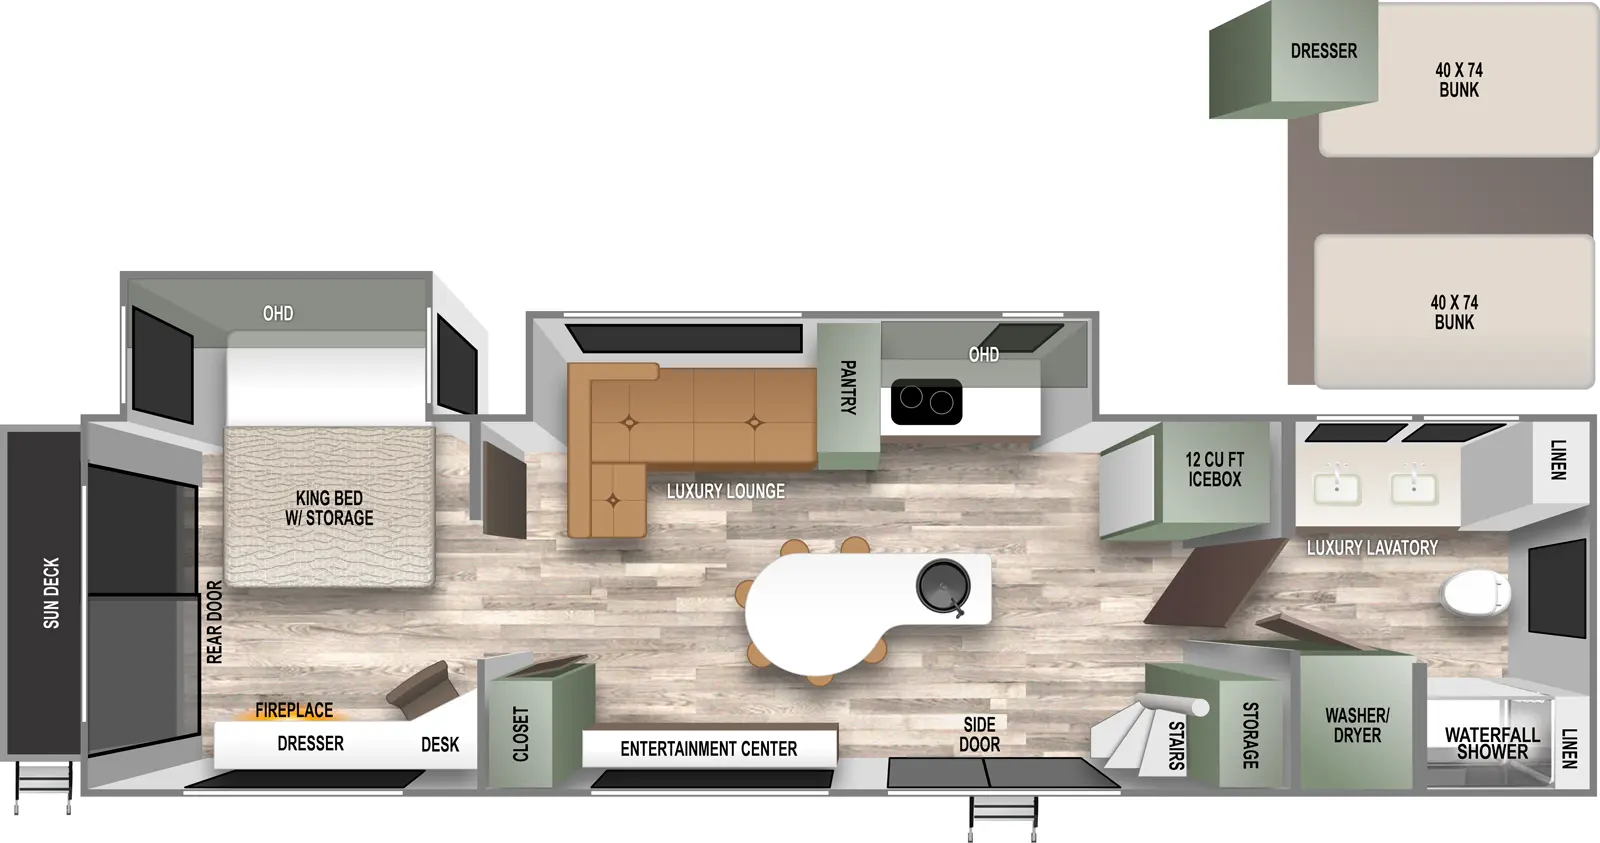 The RVS3 has one slideout and two entries. Interior layout front to back: full bathroom with linen closets, luxury lavatory with two sinks, waterfall shower, and washer/dryer; loft with two bunks and a dresser above the bathroom; off-door side icebox, and slideout with kitchen counter with cooktop, overhead cabinet, pantry, and luxury lounge; kitchen island with sink and seating; door side storage, stairs to loft, side door entry, entertainment center, and closet; rear bedroom with off-door side side-facing king bed slideout with storage and overhead cabinet, door side work area with desk, dresser and fireplace below, and rear door that leads to a sun deck with steps.